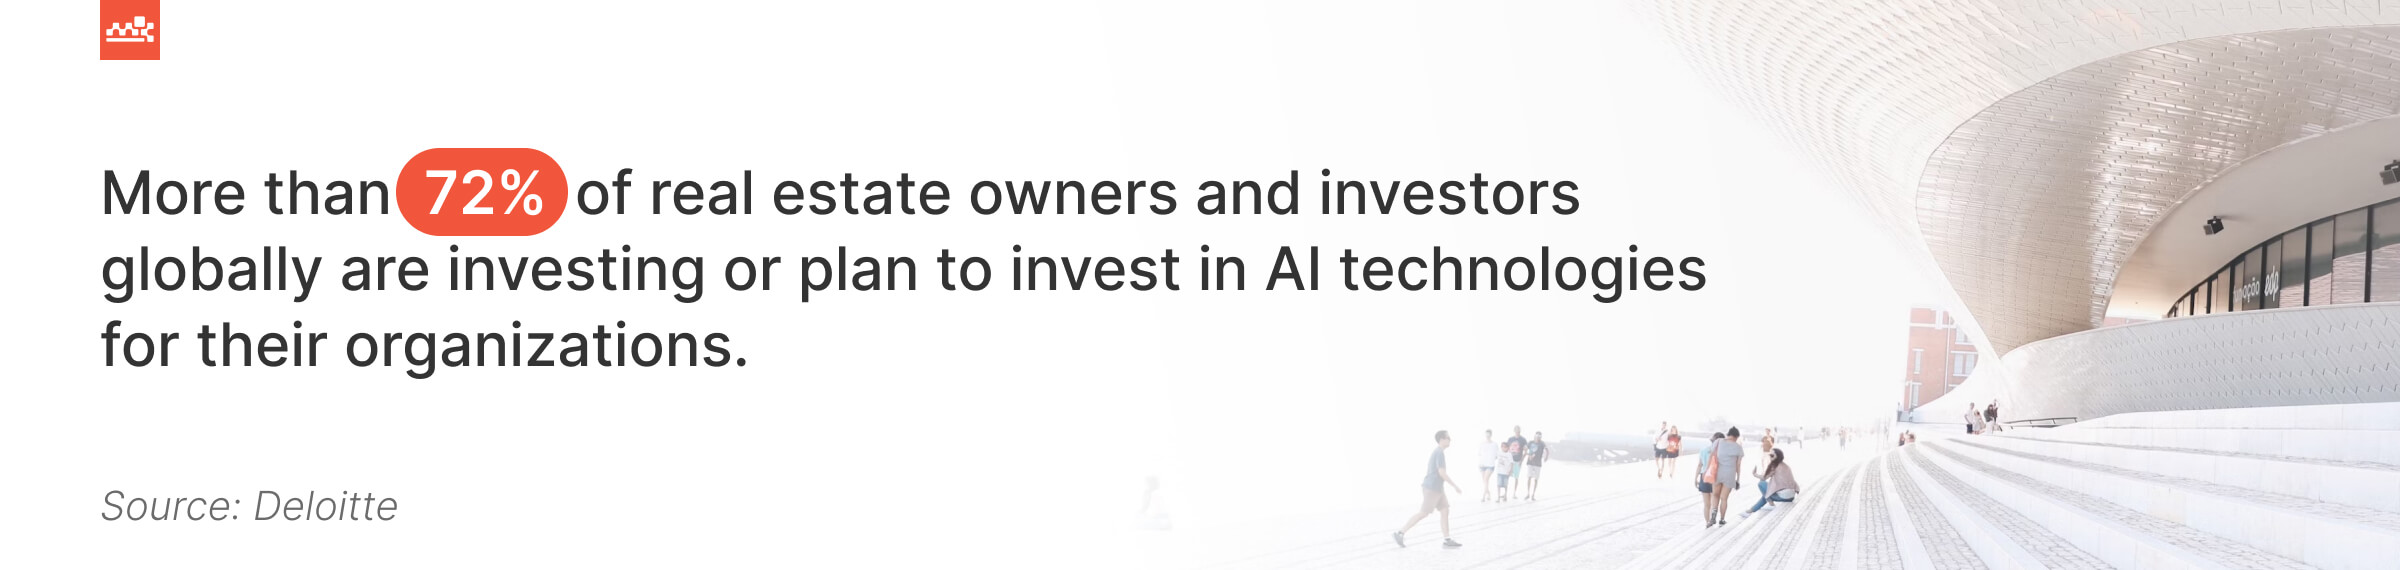 AI Technology Investment Stats